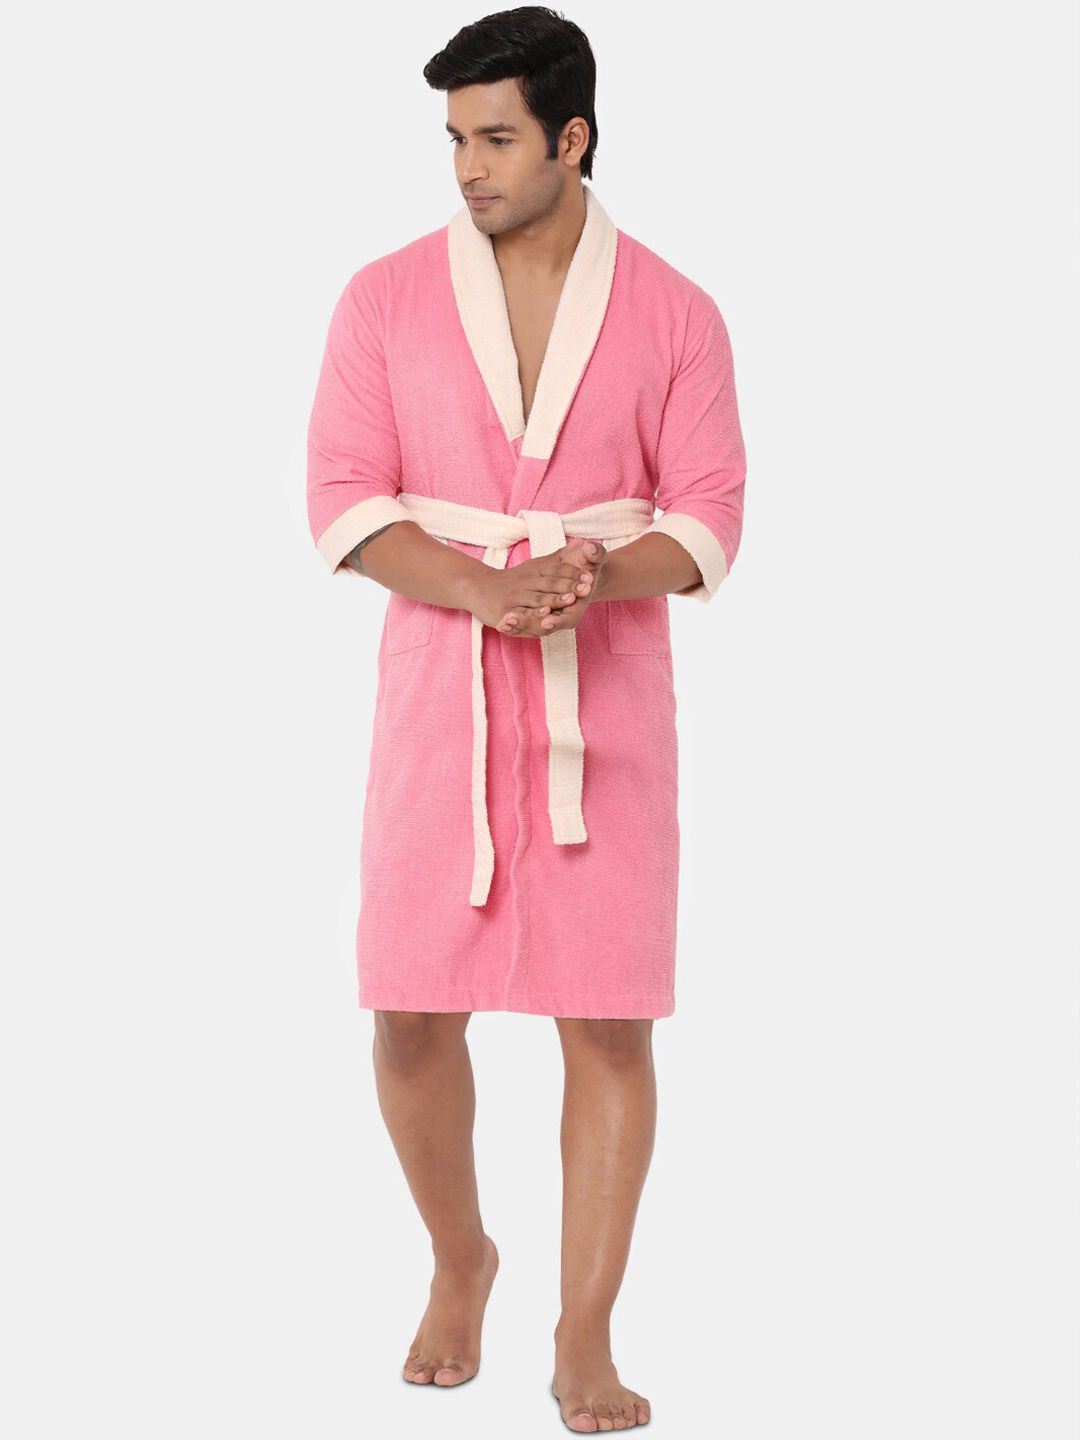 SPACES Unisex Pink Solid Cotton 300 GSM Bath Robe Price in India